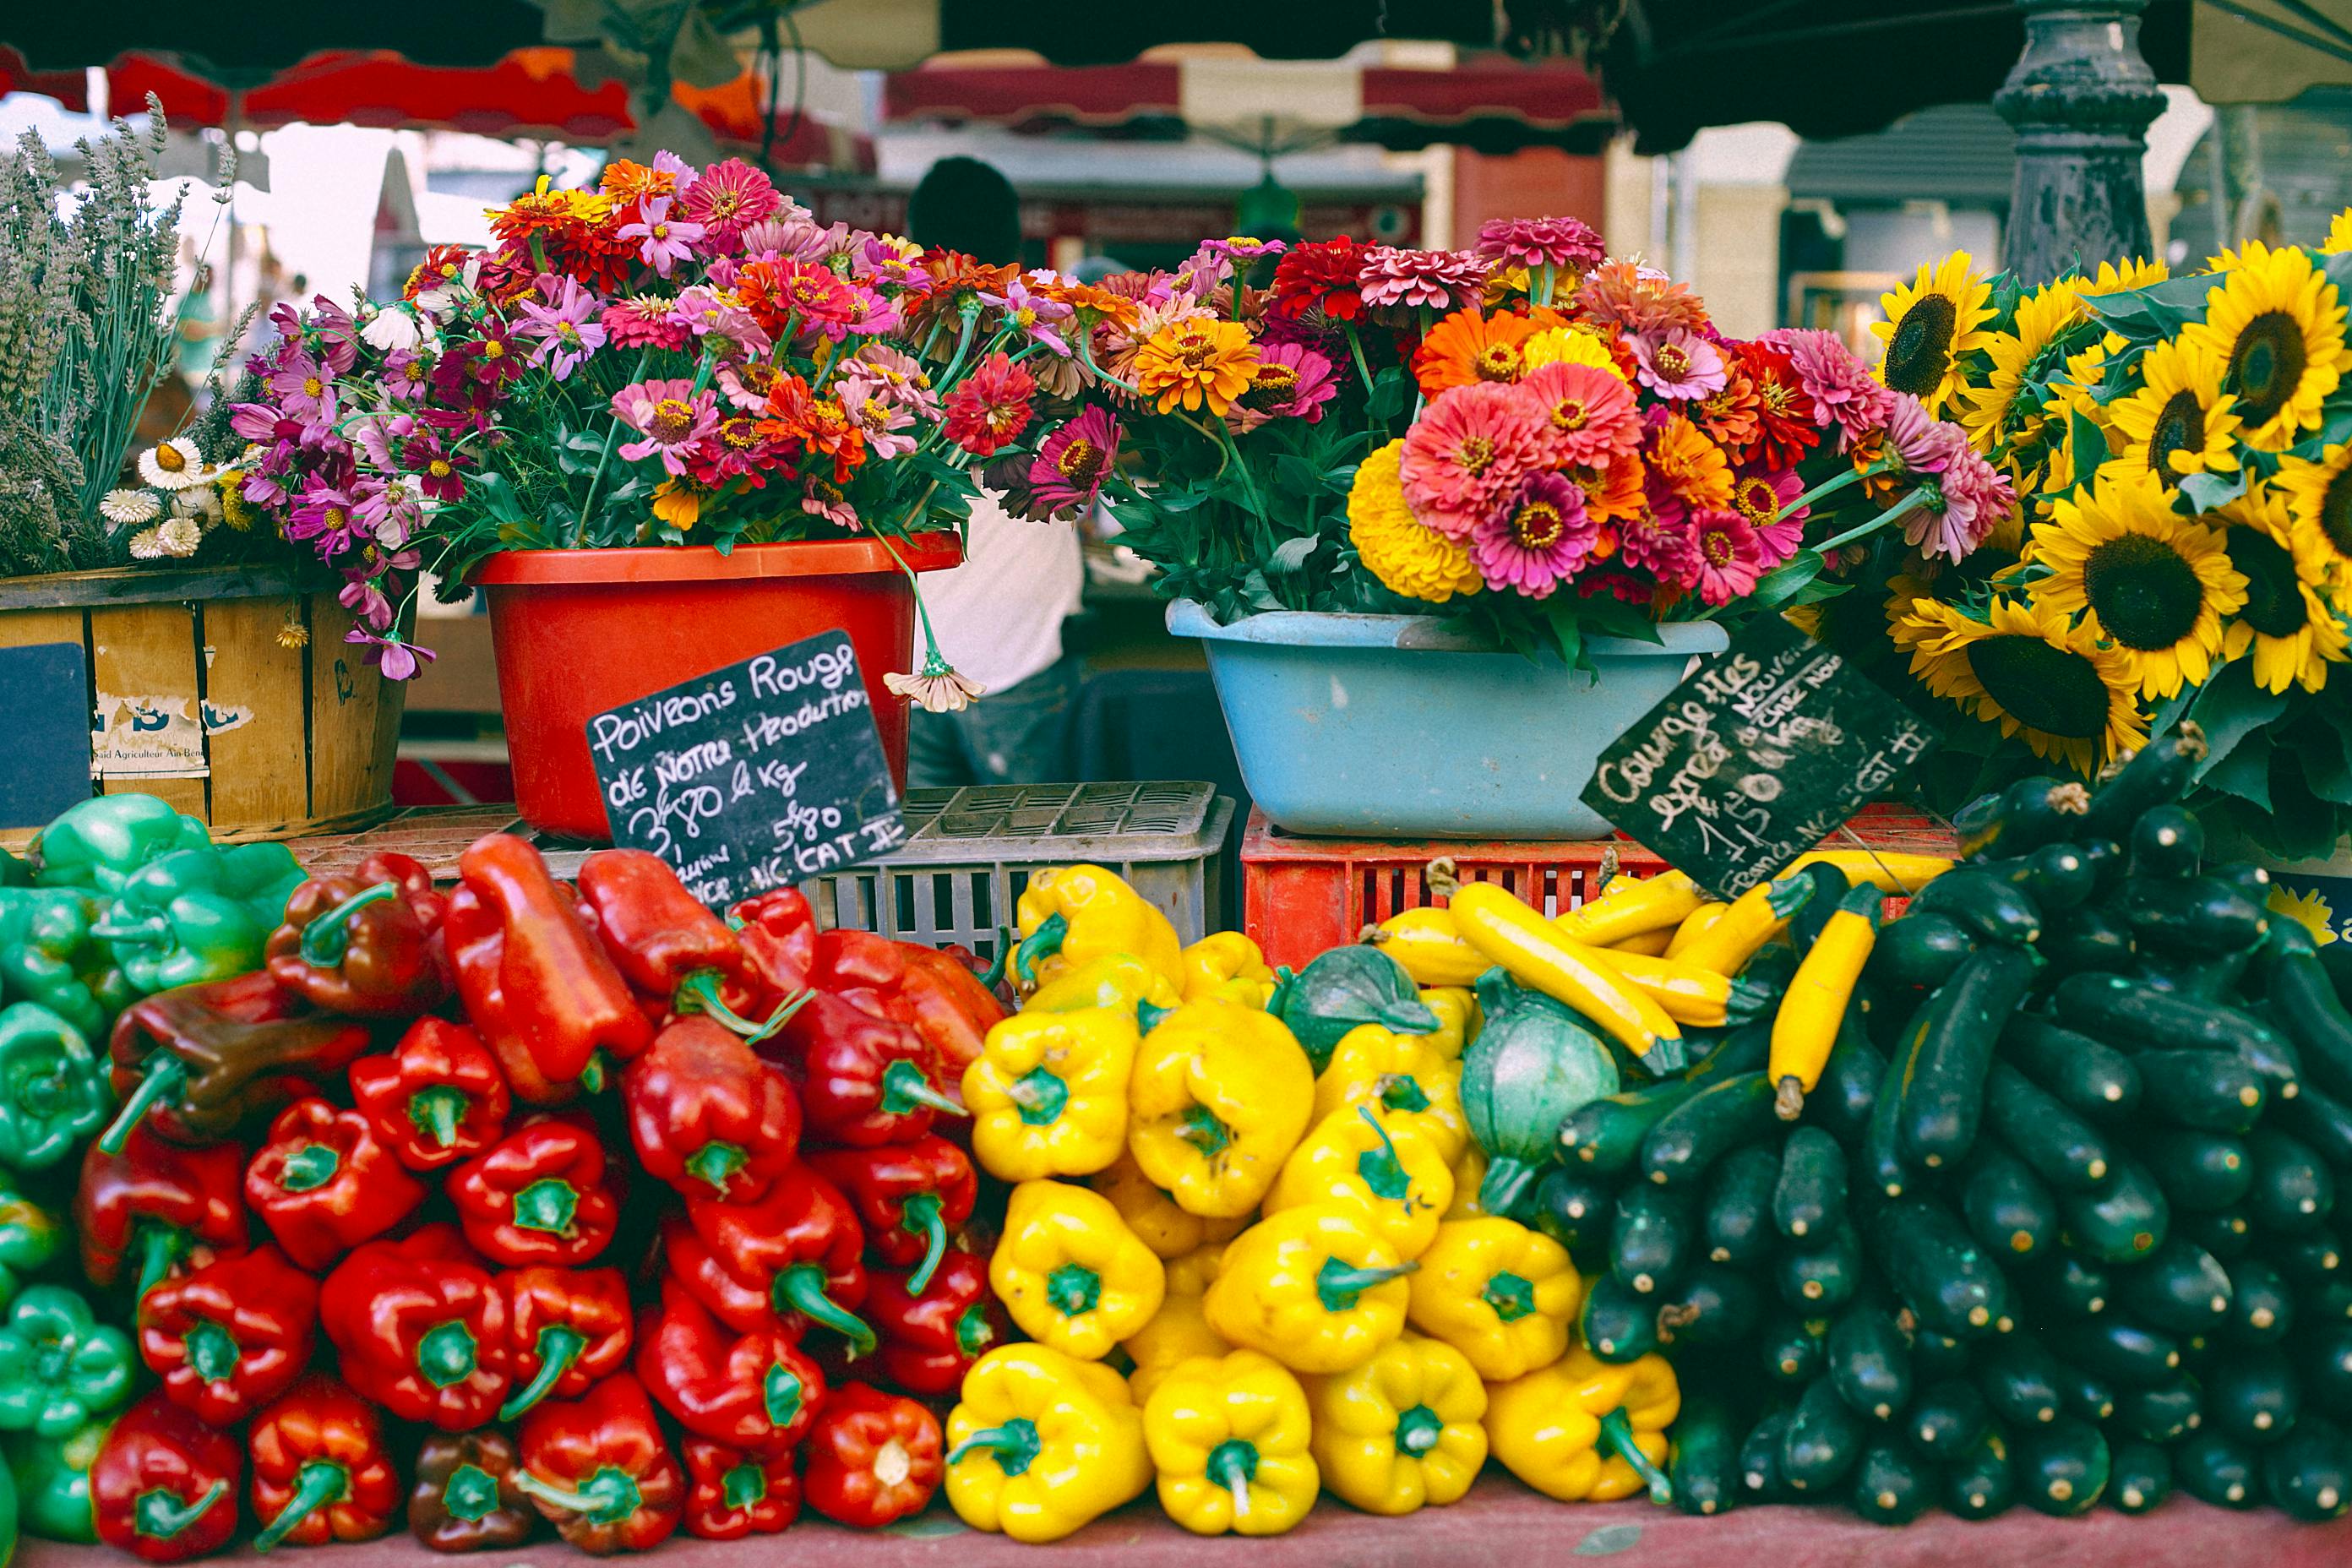 assorted vegetables and blooming flowers at market